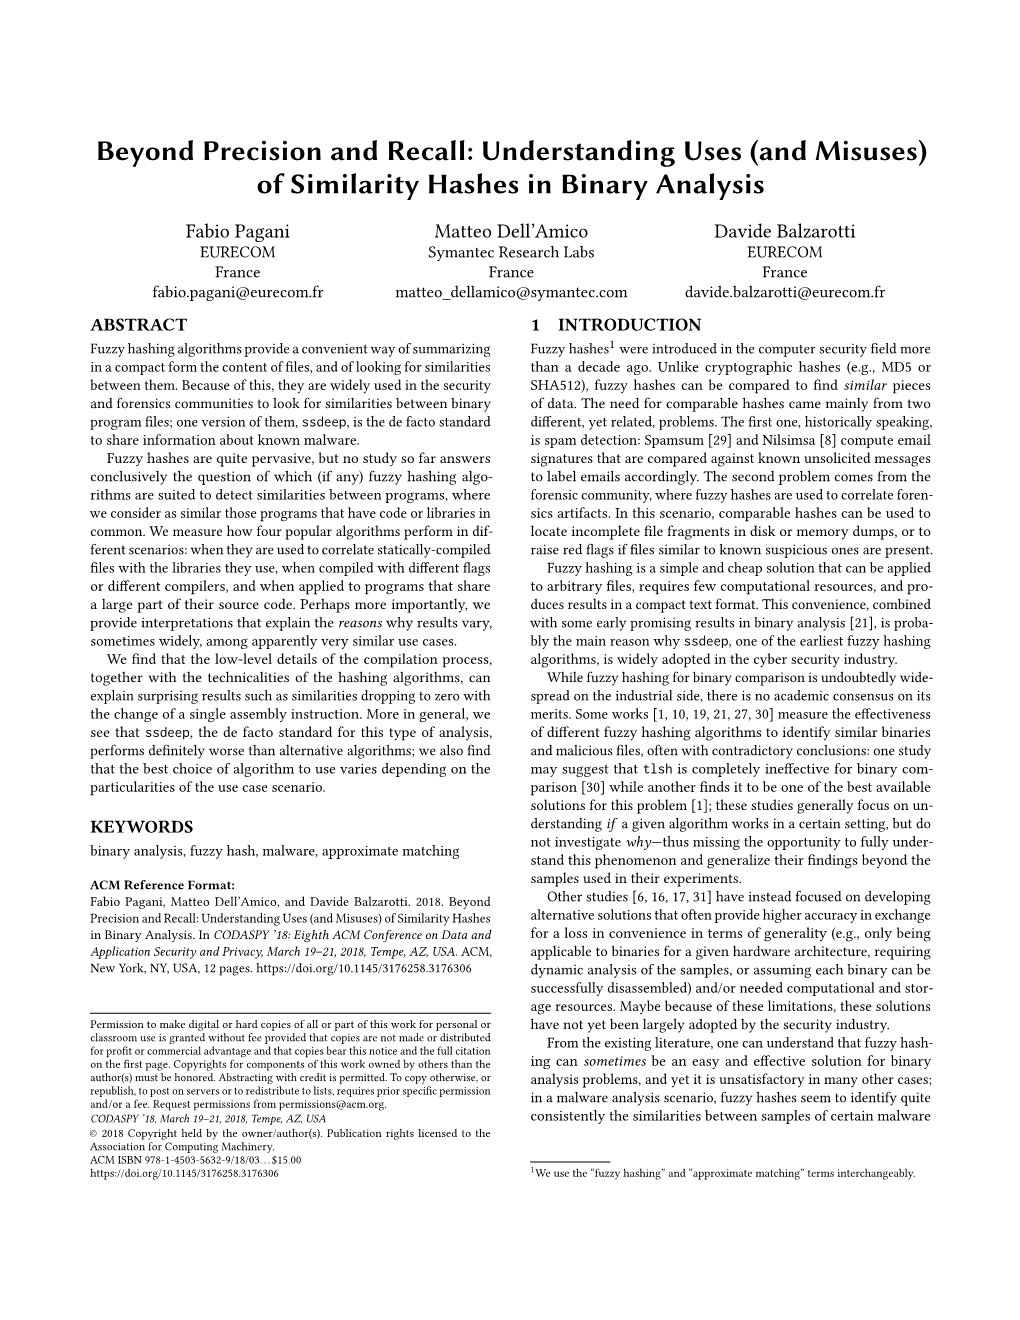 Understanding Uses (And Misuses) of Similarity Hashes in Binary Analysis